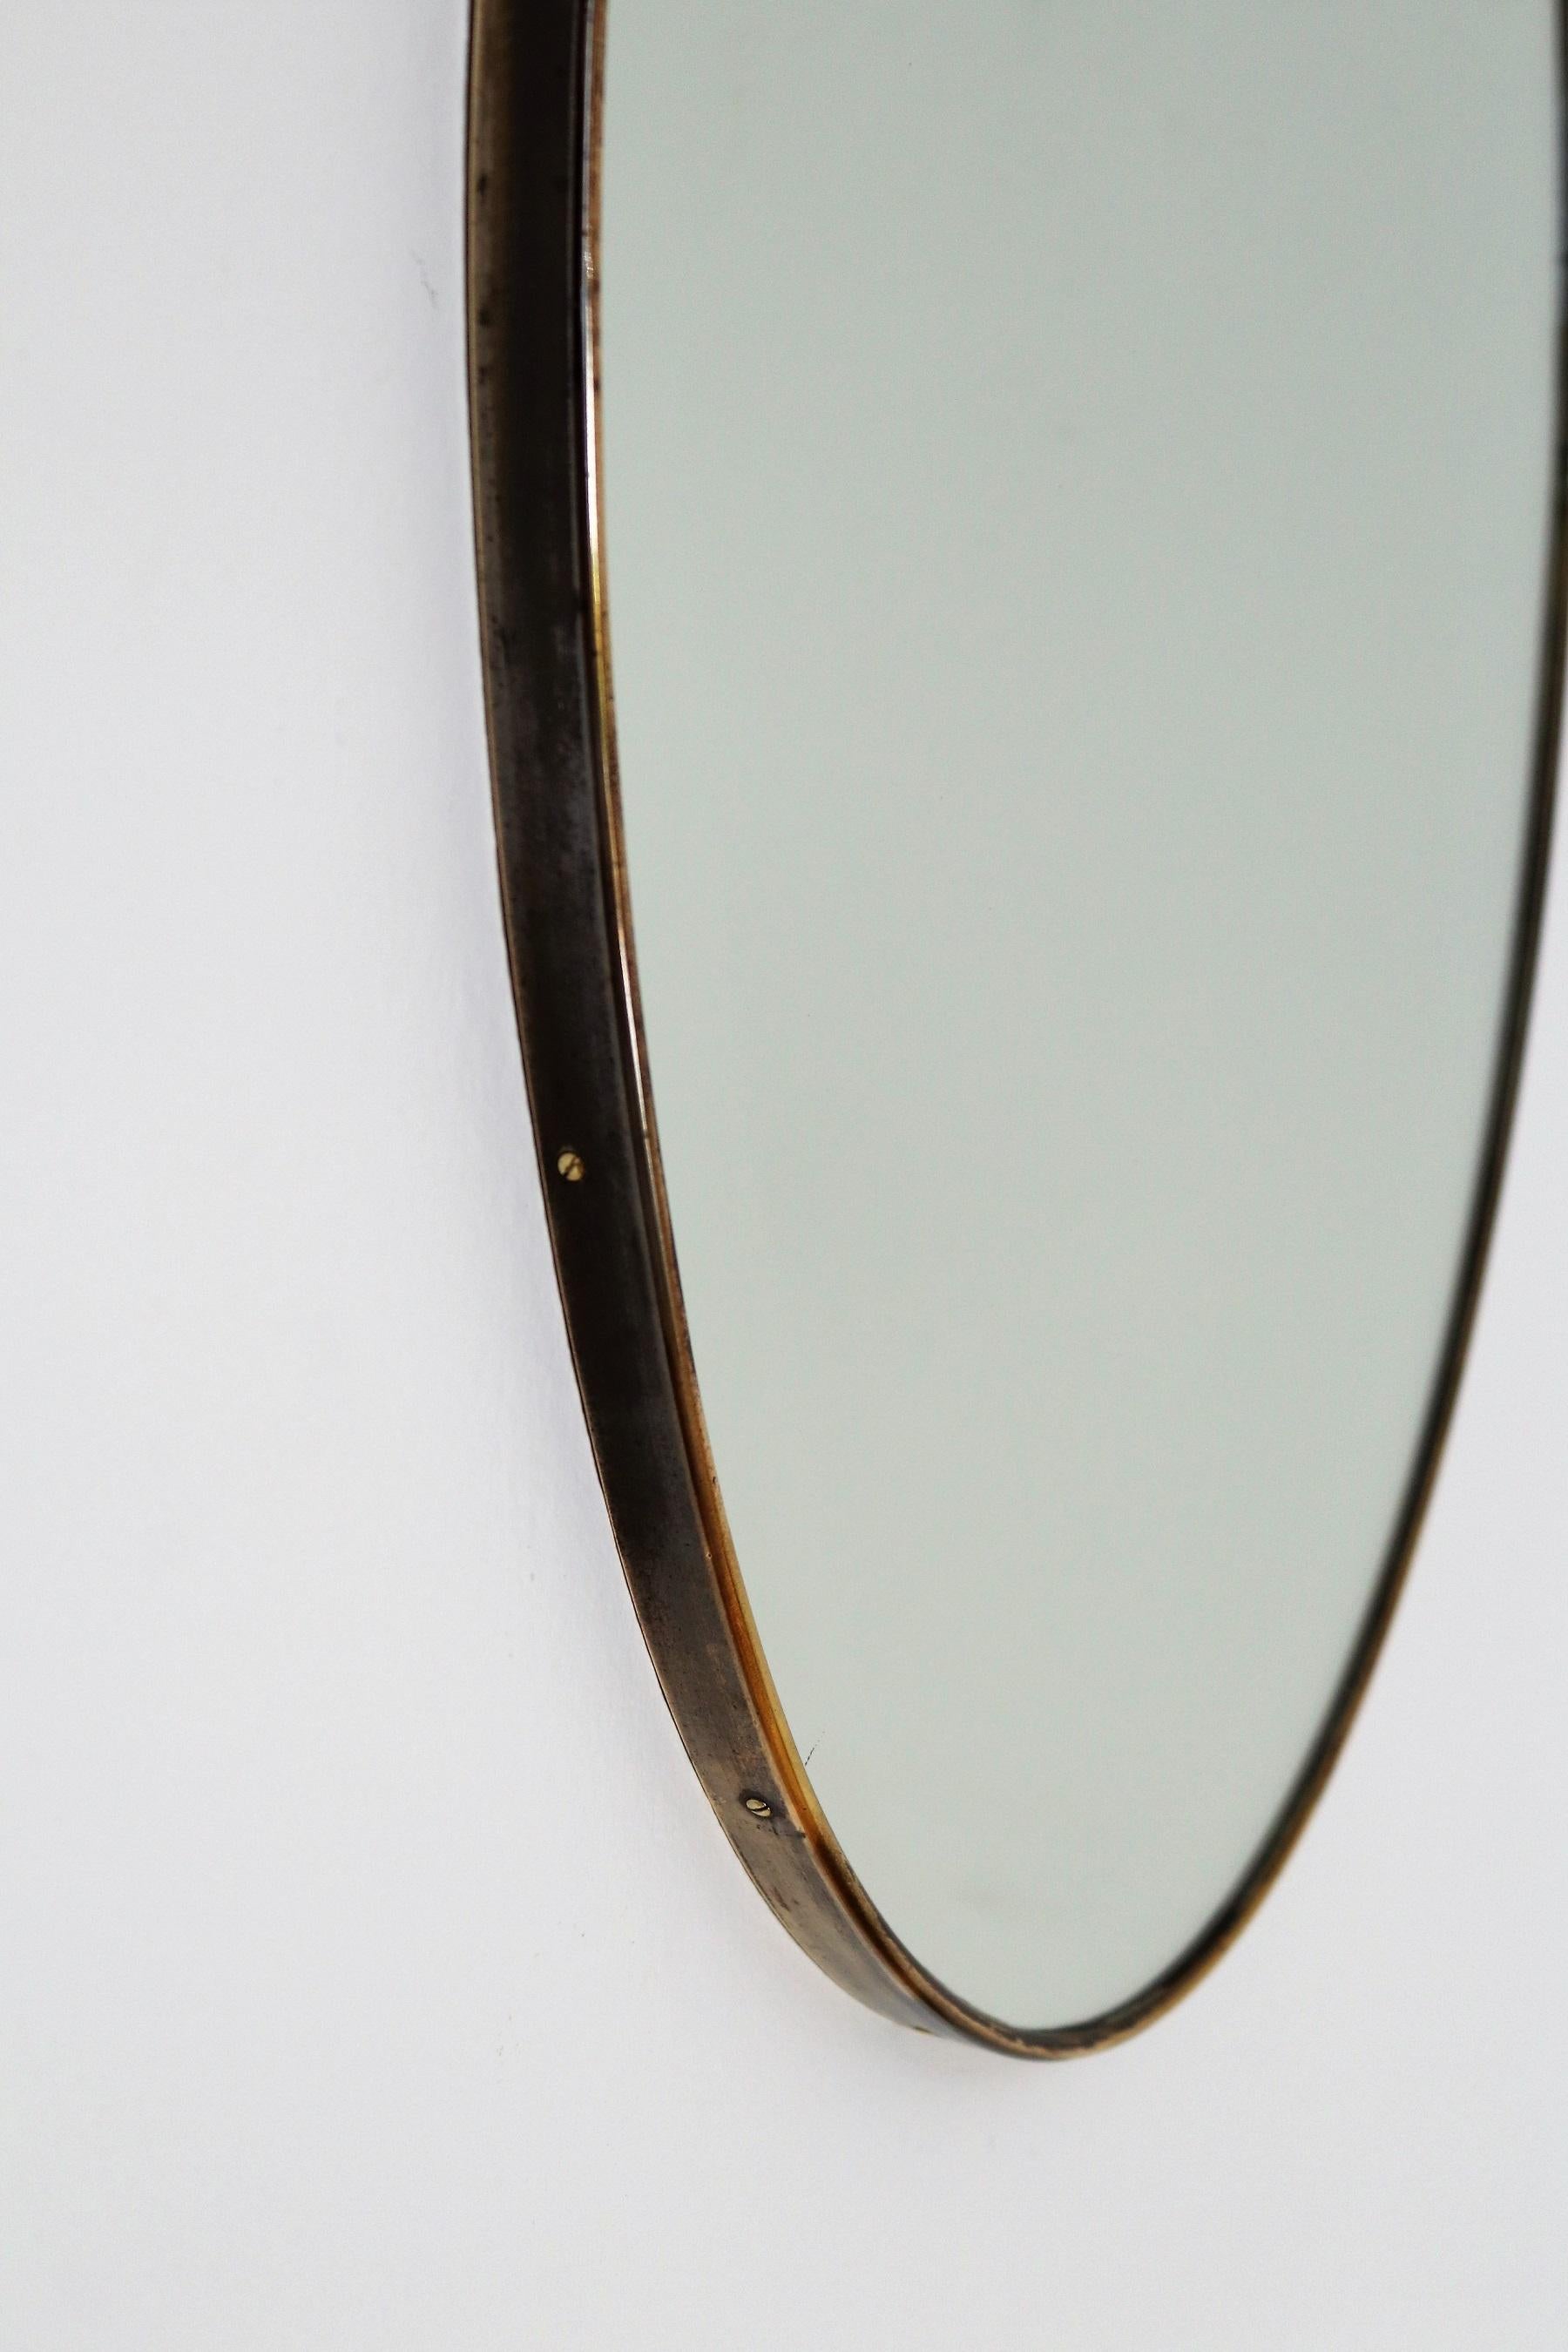 Mid-20th Century Italian Midcentury Oval Wall Mirror with Brass Frame, 1950s